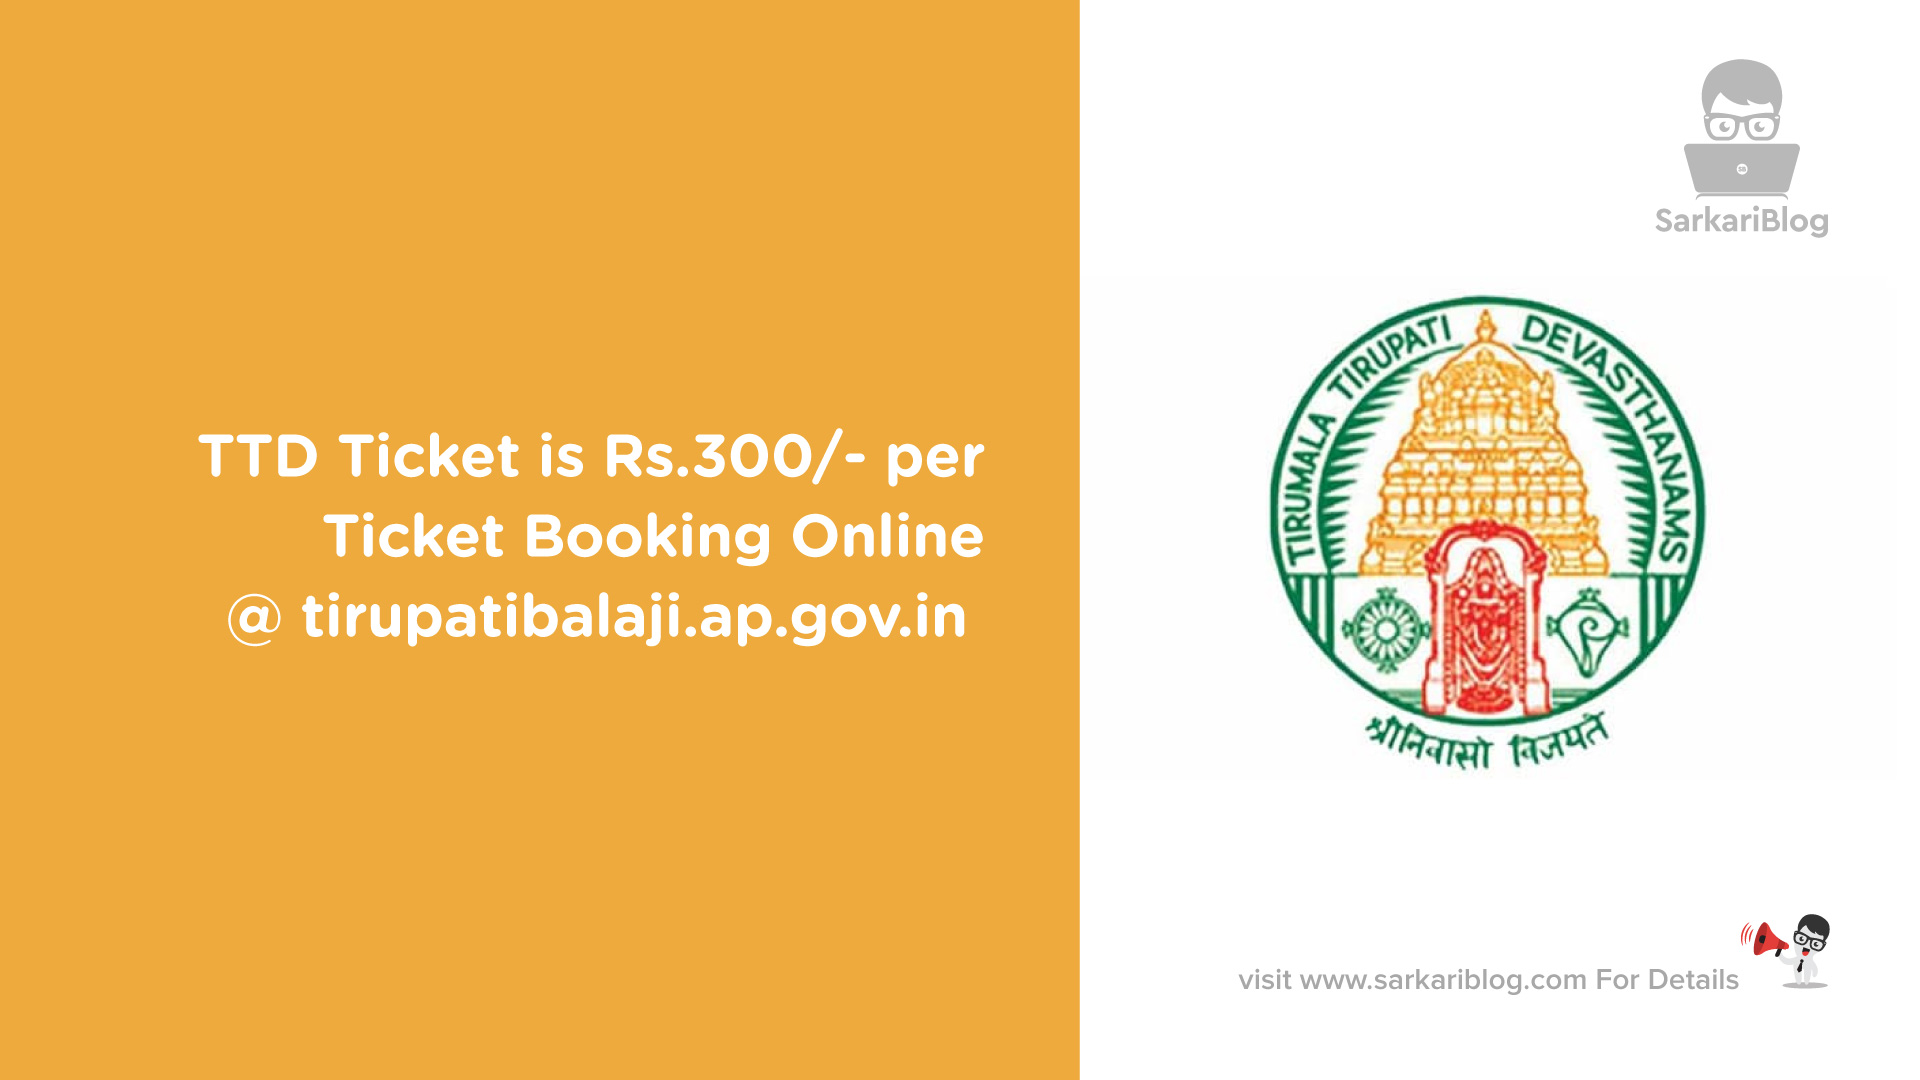 TTD Ticket is Rs.300 per Ticket Booking Online